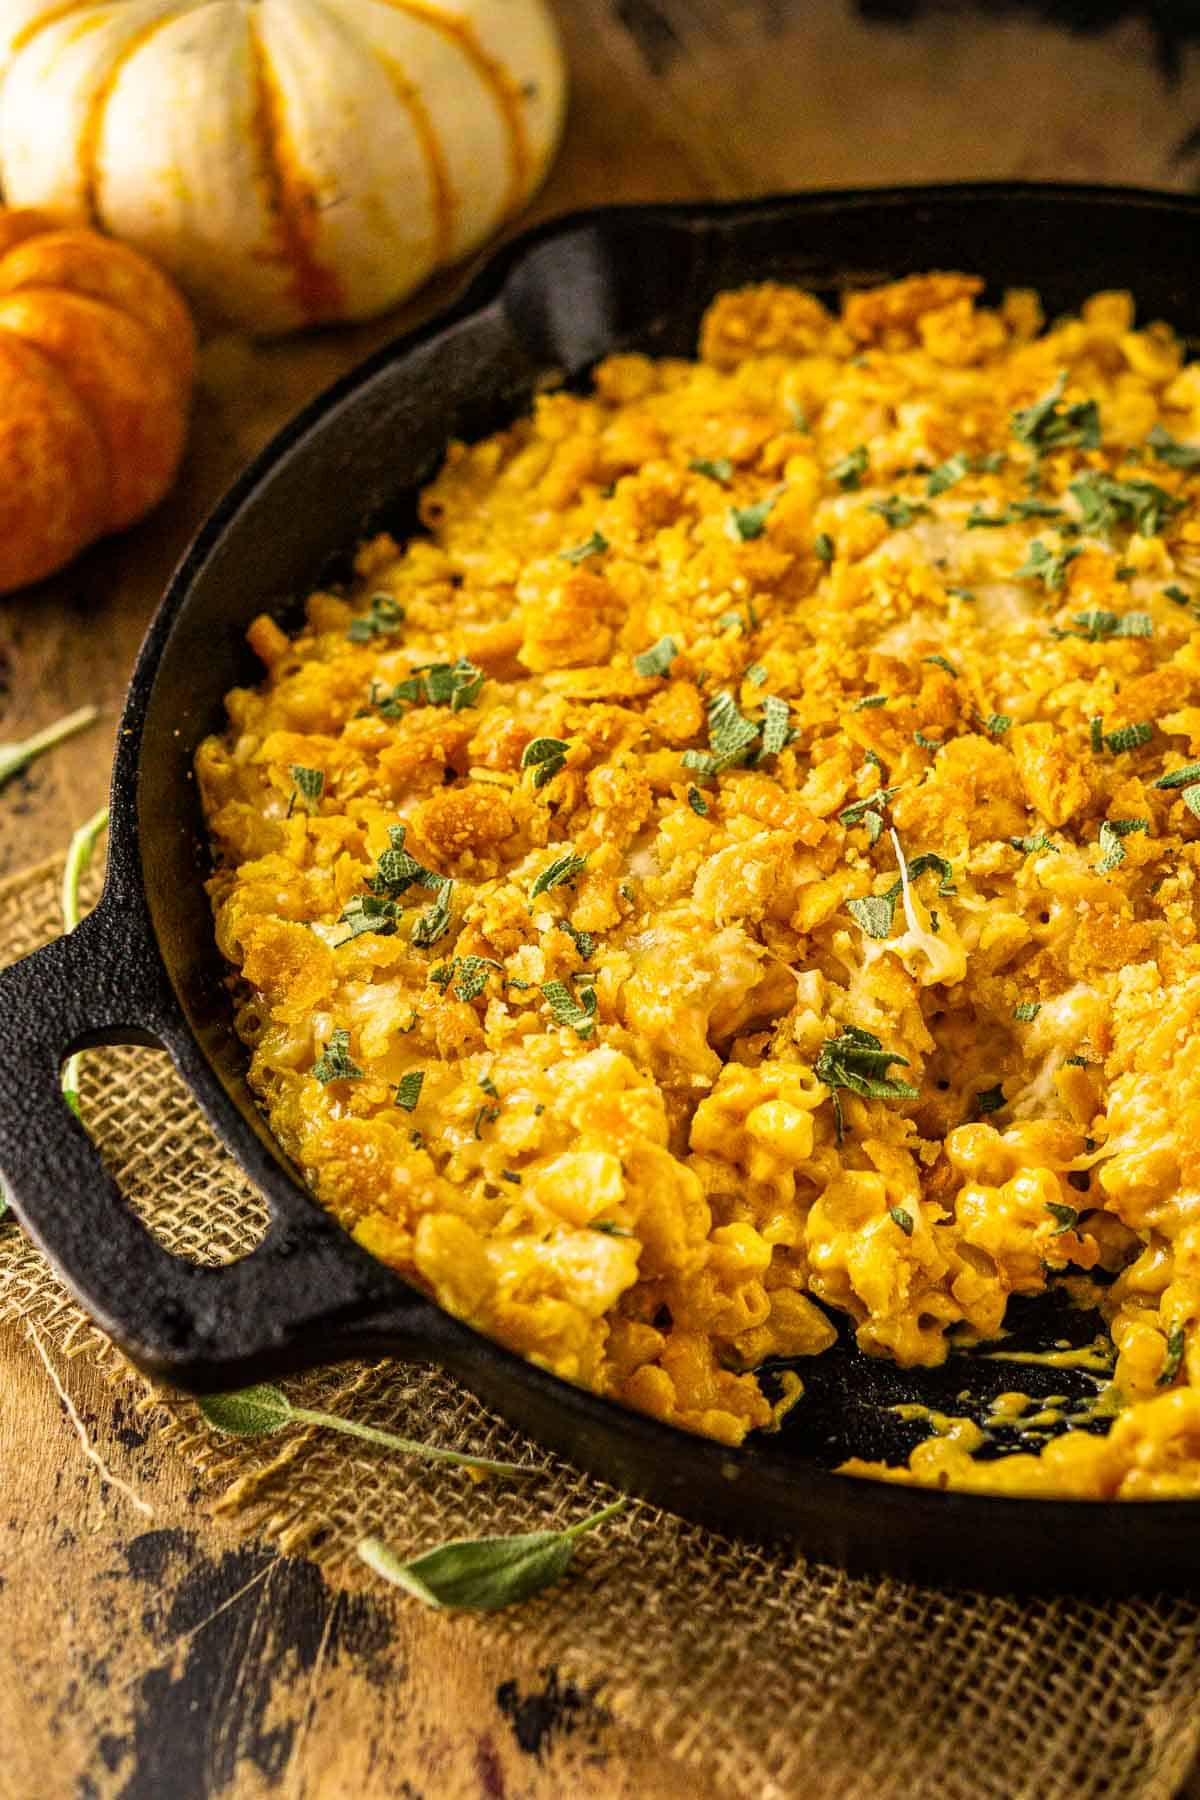 The skillet of pumpkin mac and cheese with pumpkins in the background.